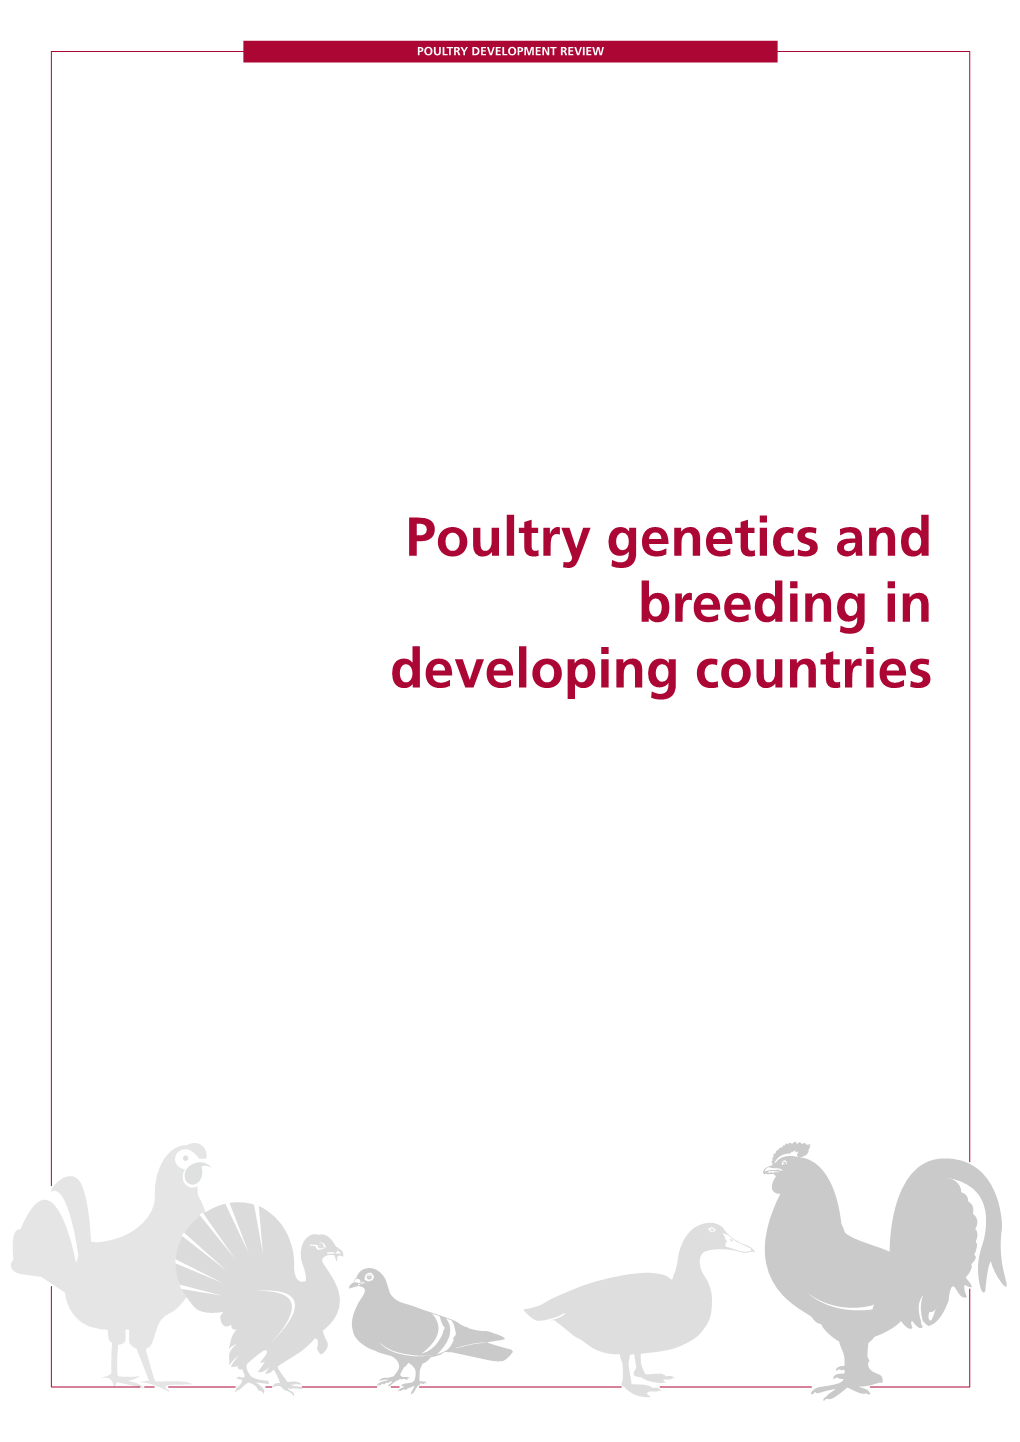 Poultry Genetics and Breeding in Developing Countries Poultry Development Review • Poultry Genetics and Breeding in Developing Countries